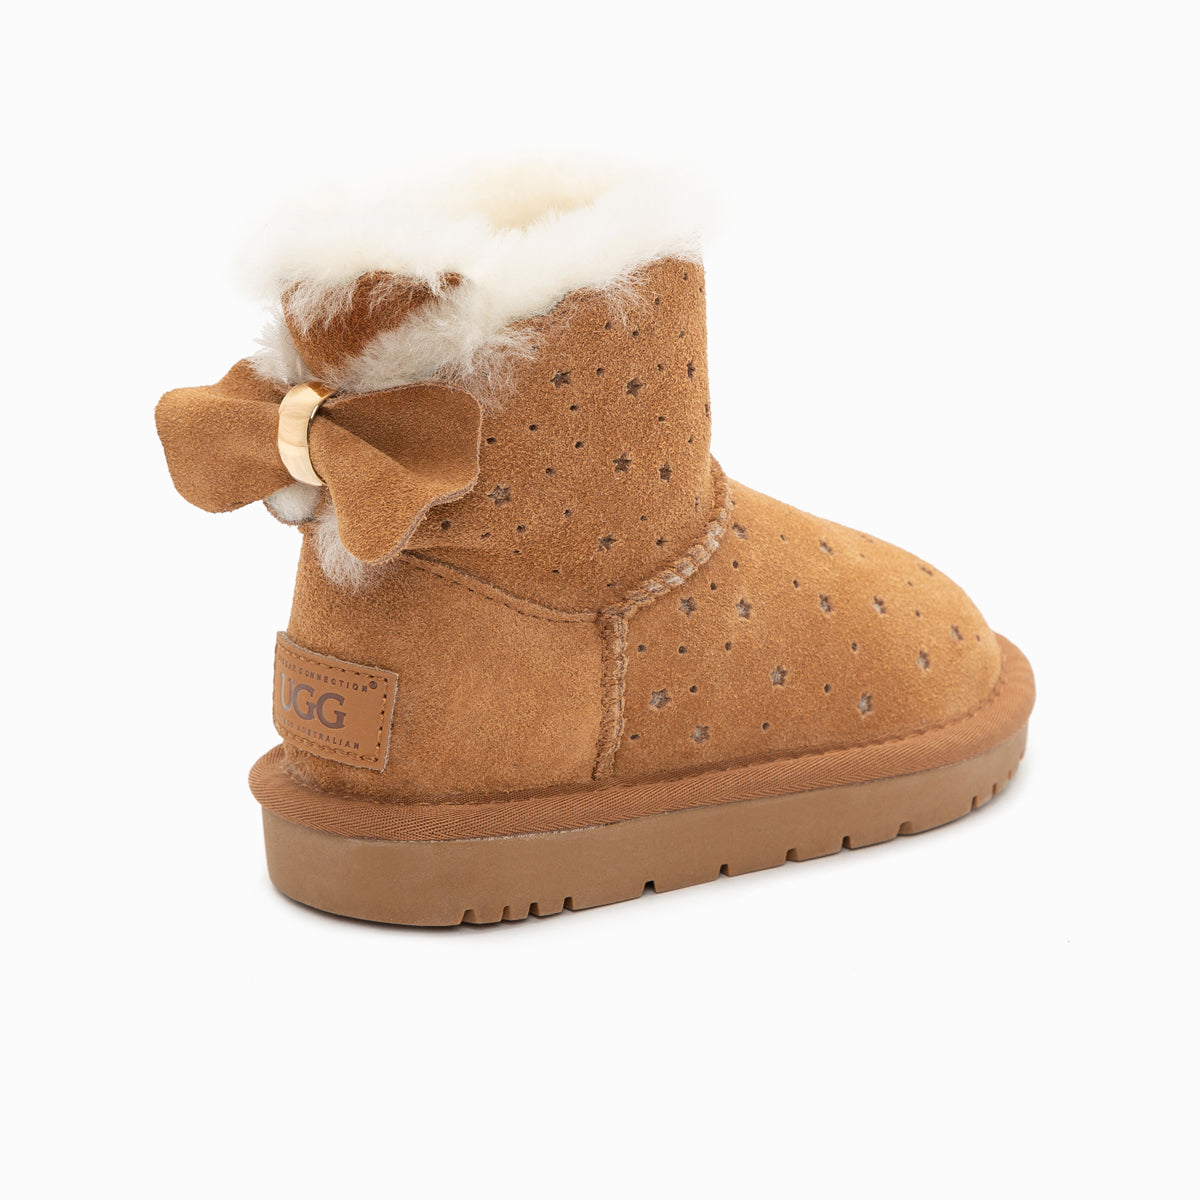 Ugg Kids Mini Bailey Bow Starry Boots-Kid Boots-PEROZ Accessories